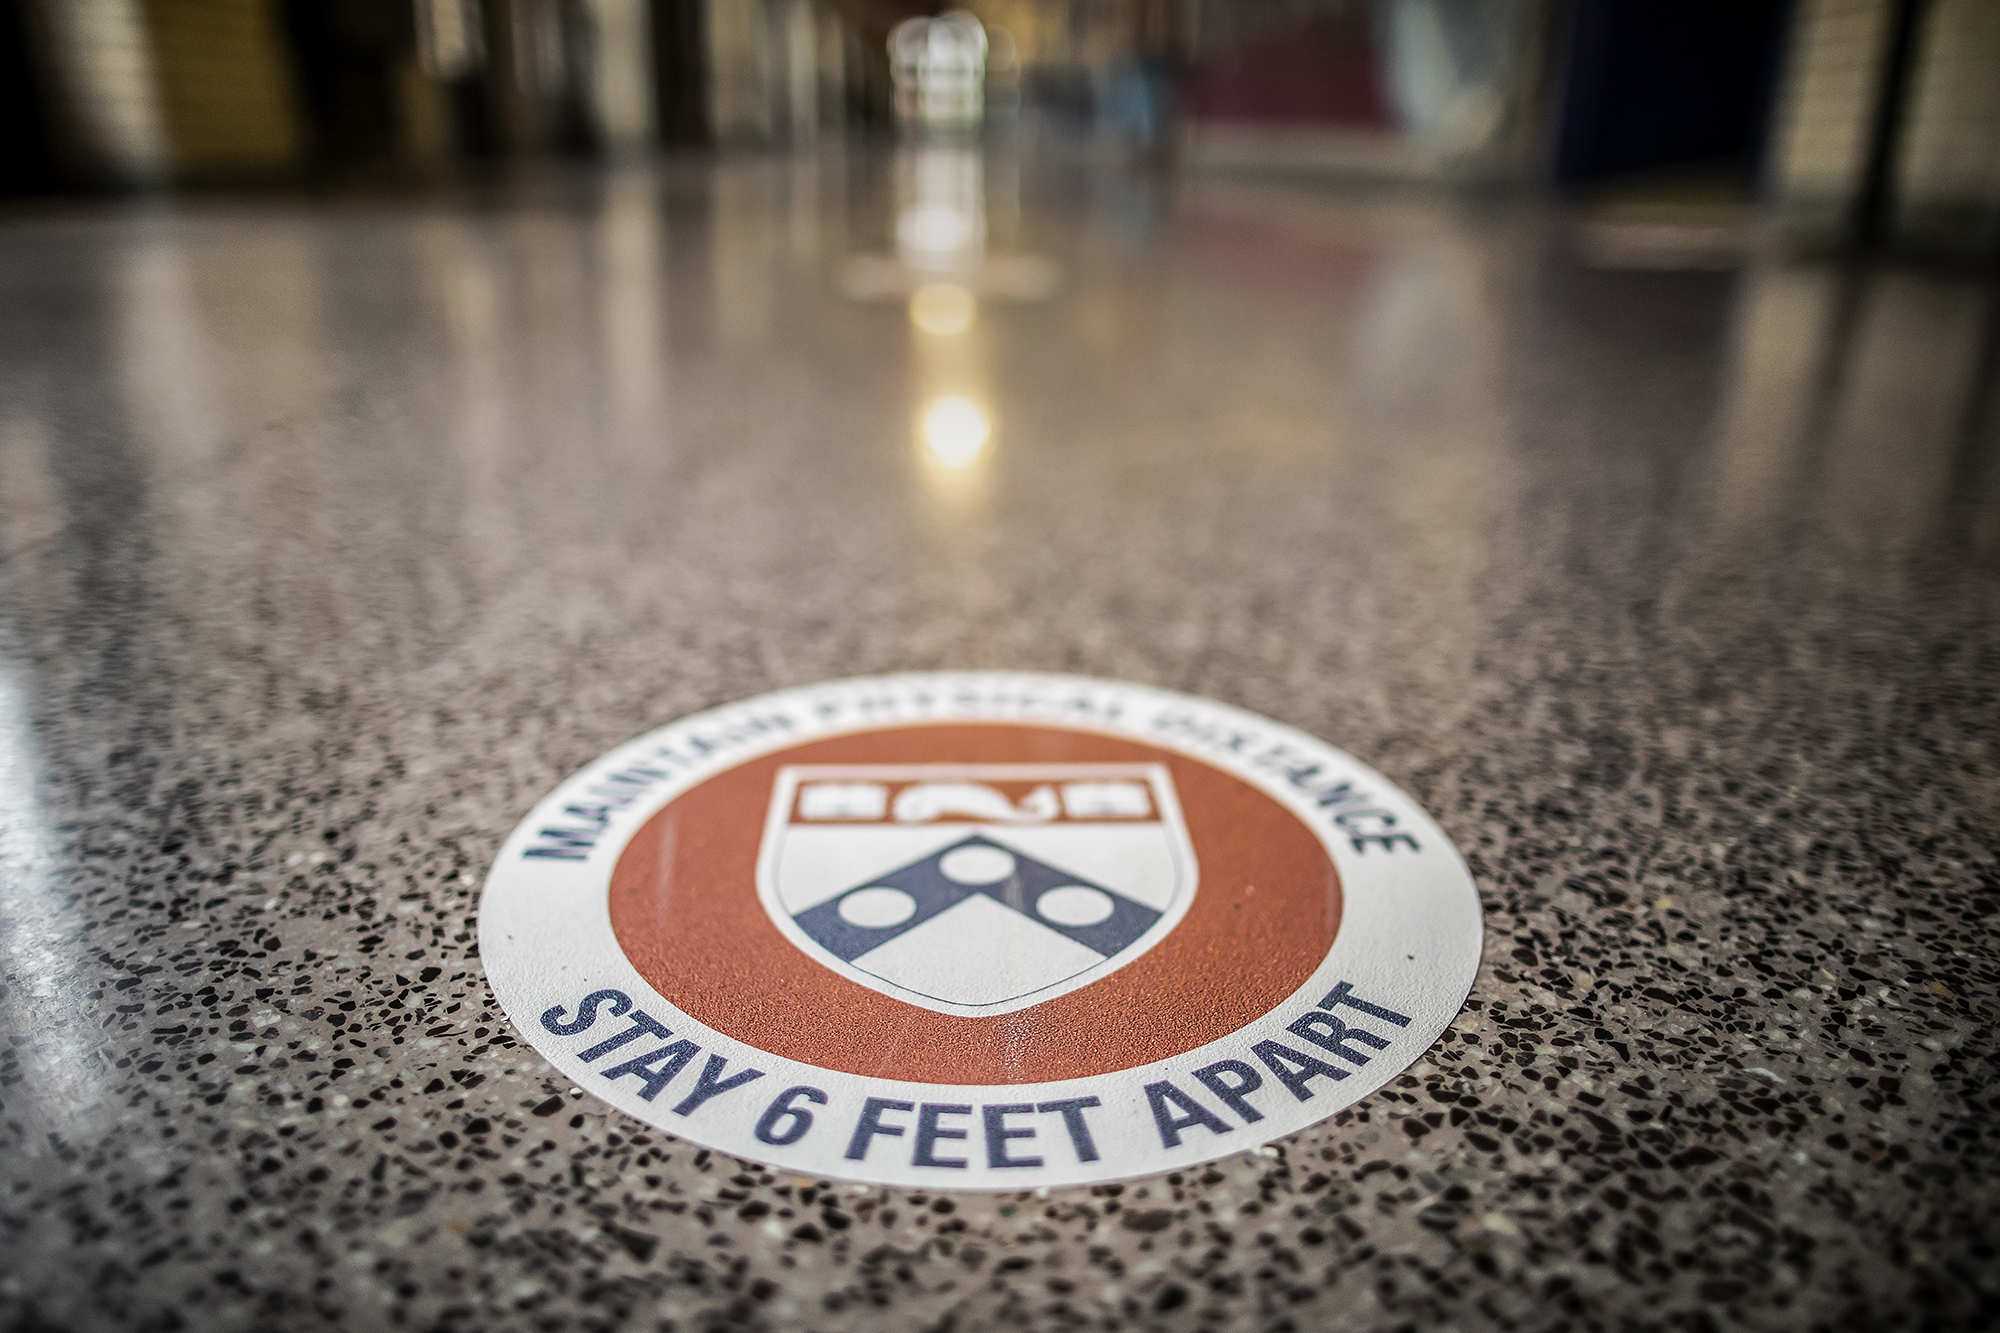 A round decal on the floor that reads MAINTAIN SOCIAL DISTANCE STAY SIX FEET APART surrounding the Penn shield logo.